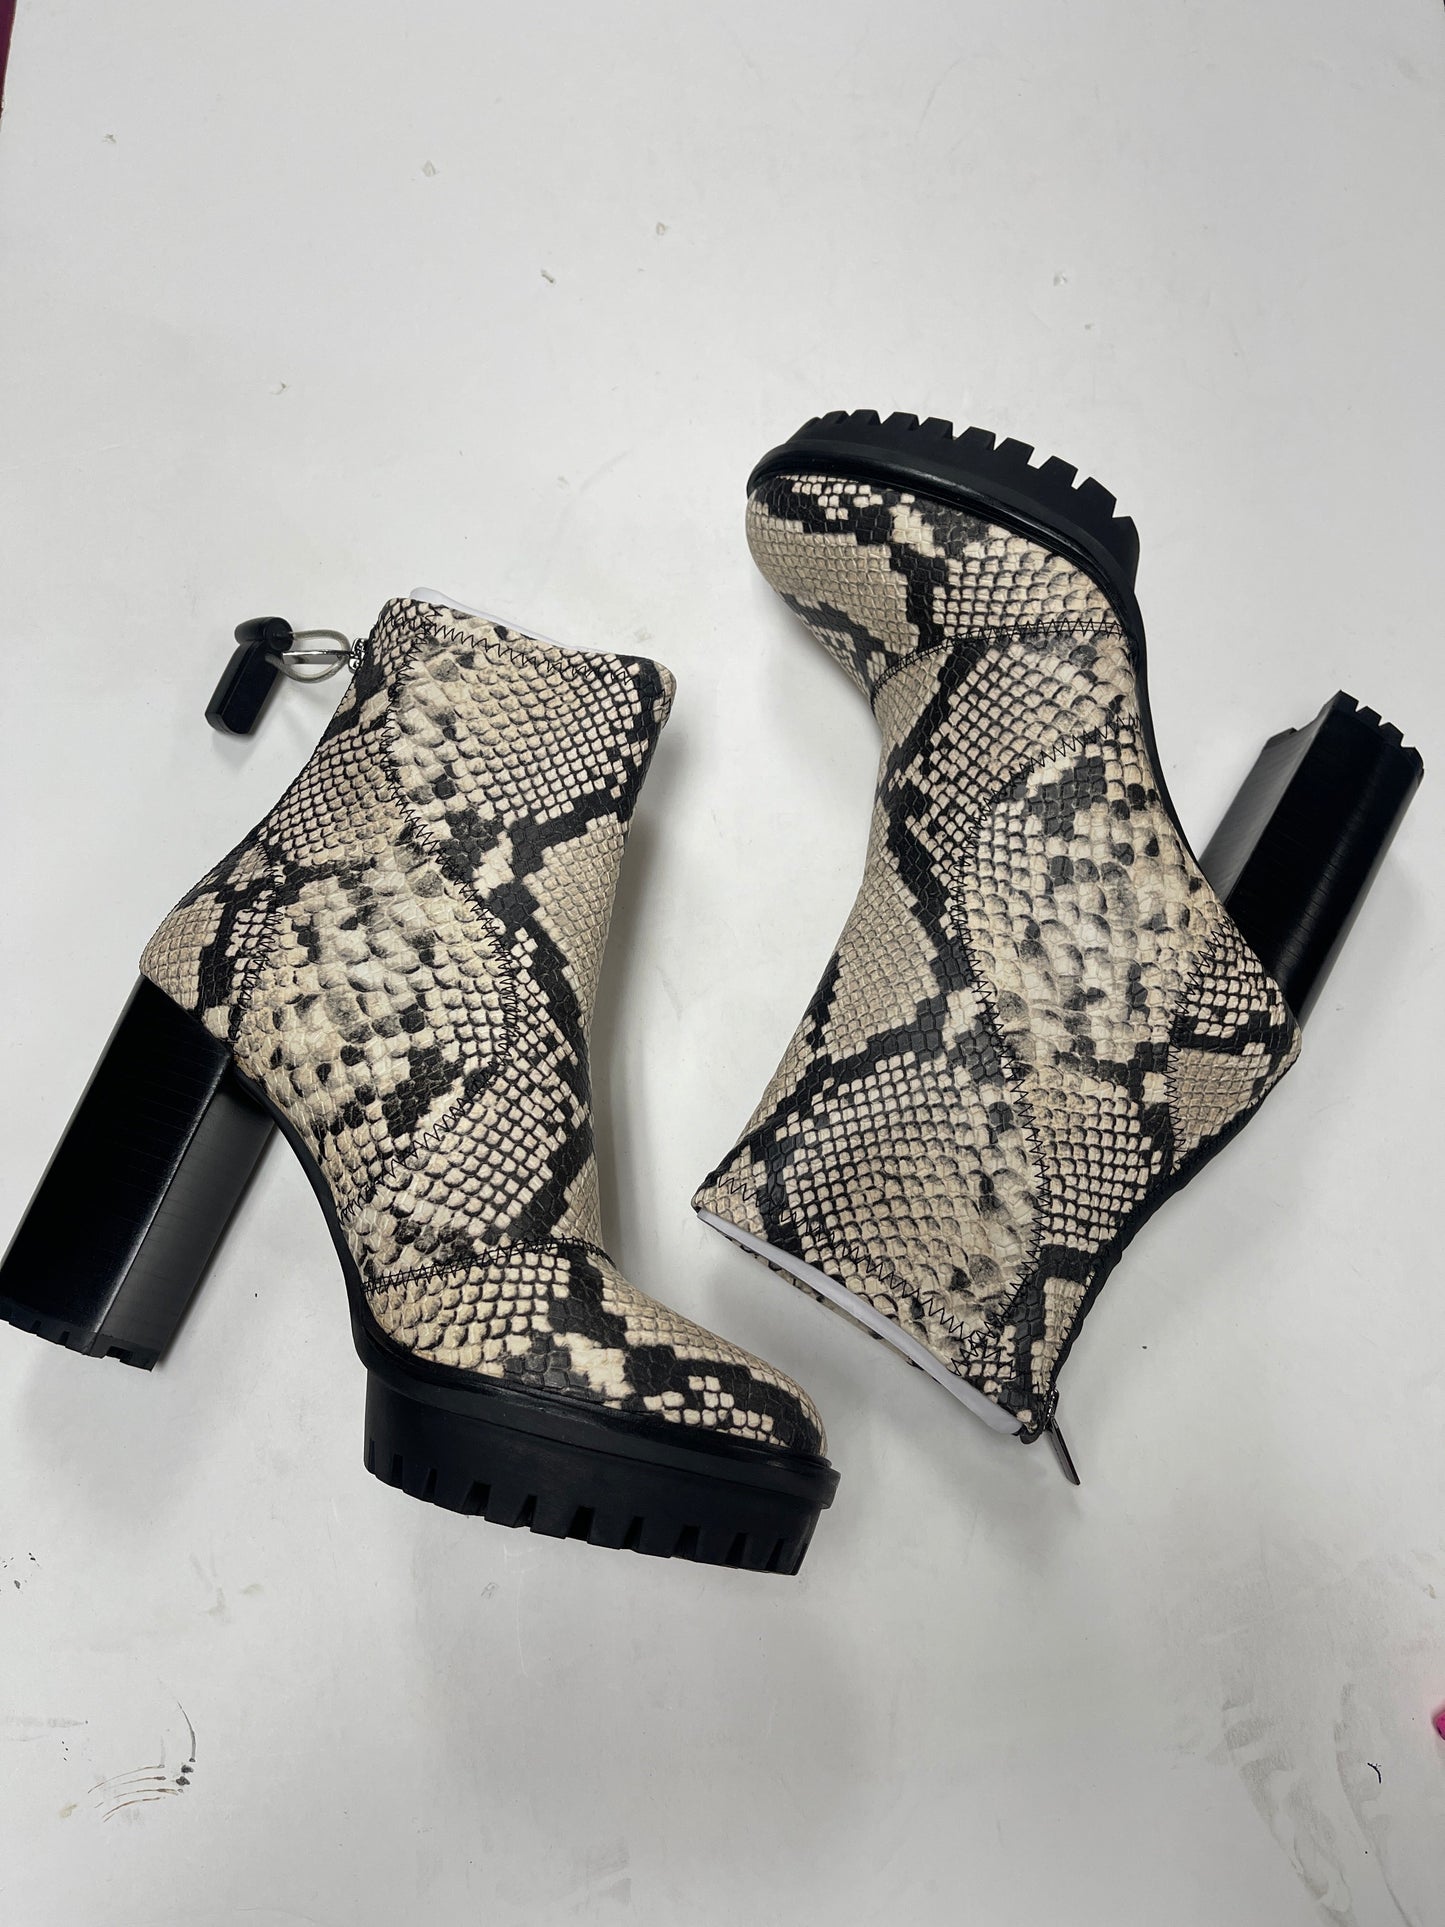 Snakeskin Print Boots Ankle Heels Vince Camuto, Size 9